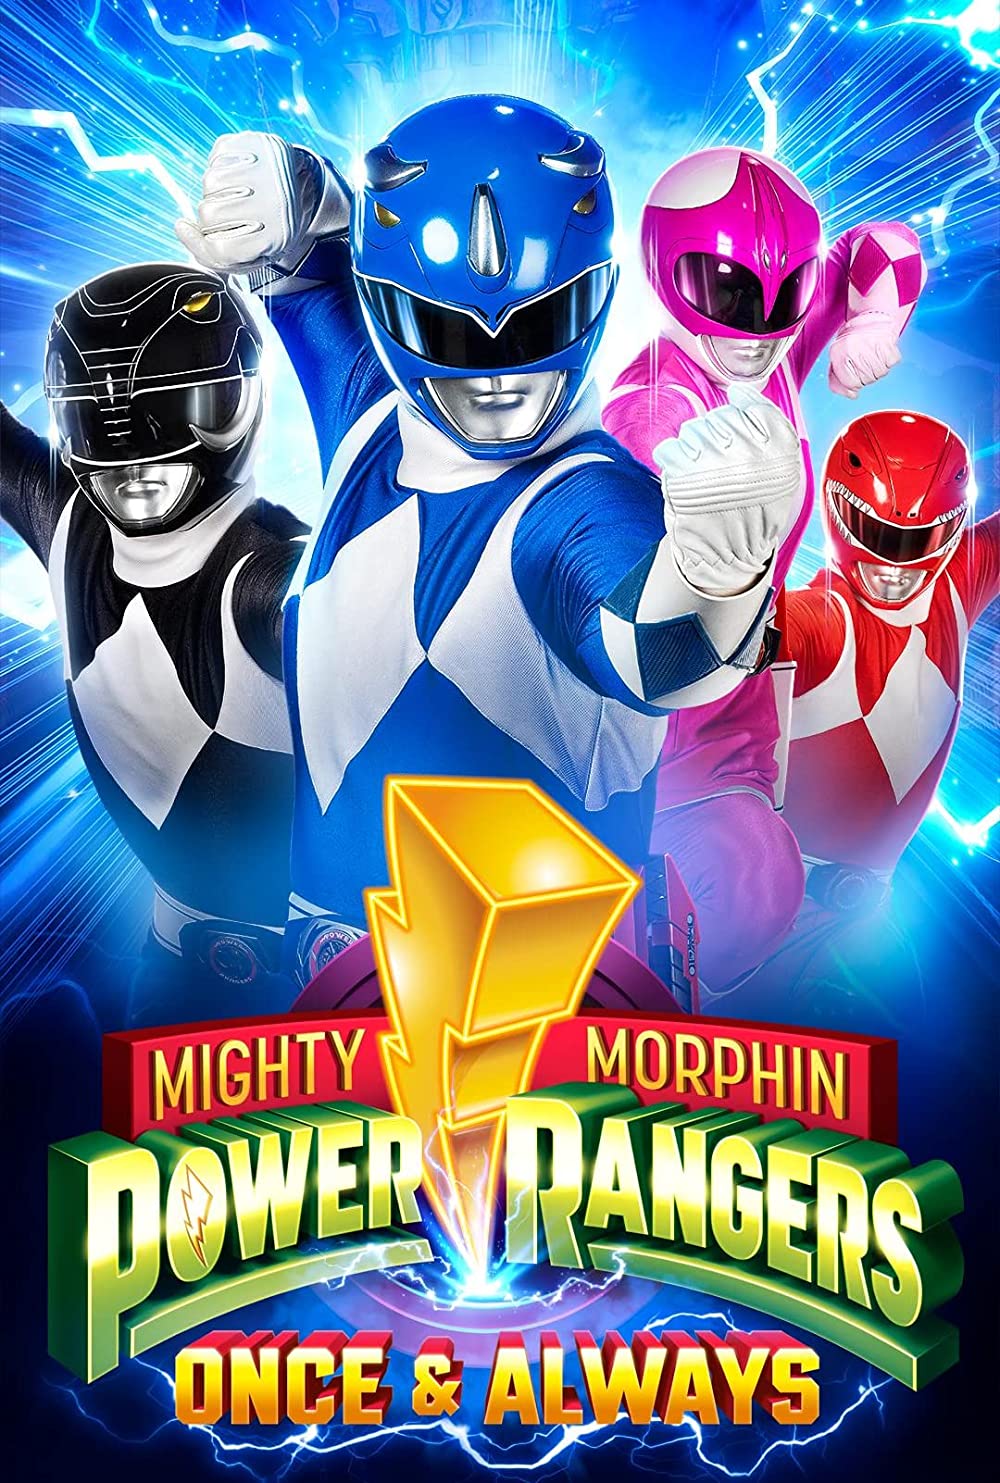 Download Mighty Morphin Power Rangers Once and Always (2023) Dual Audio {Hindi-English} Movie WEB DL 1080p | 720p | 480p [200MB] download